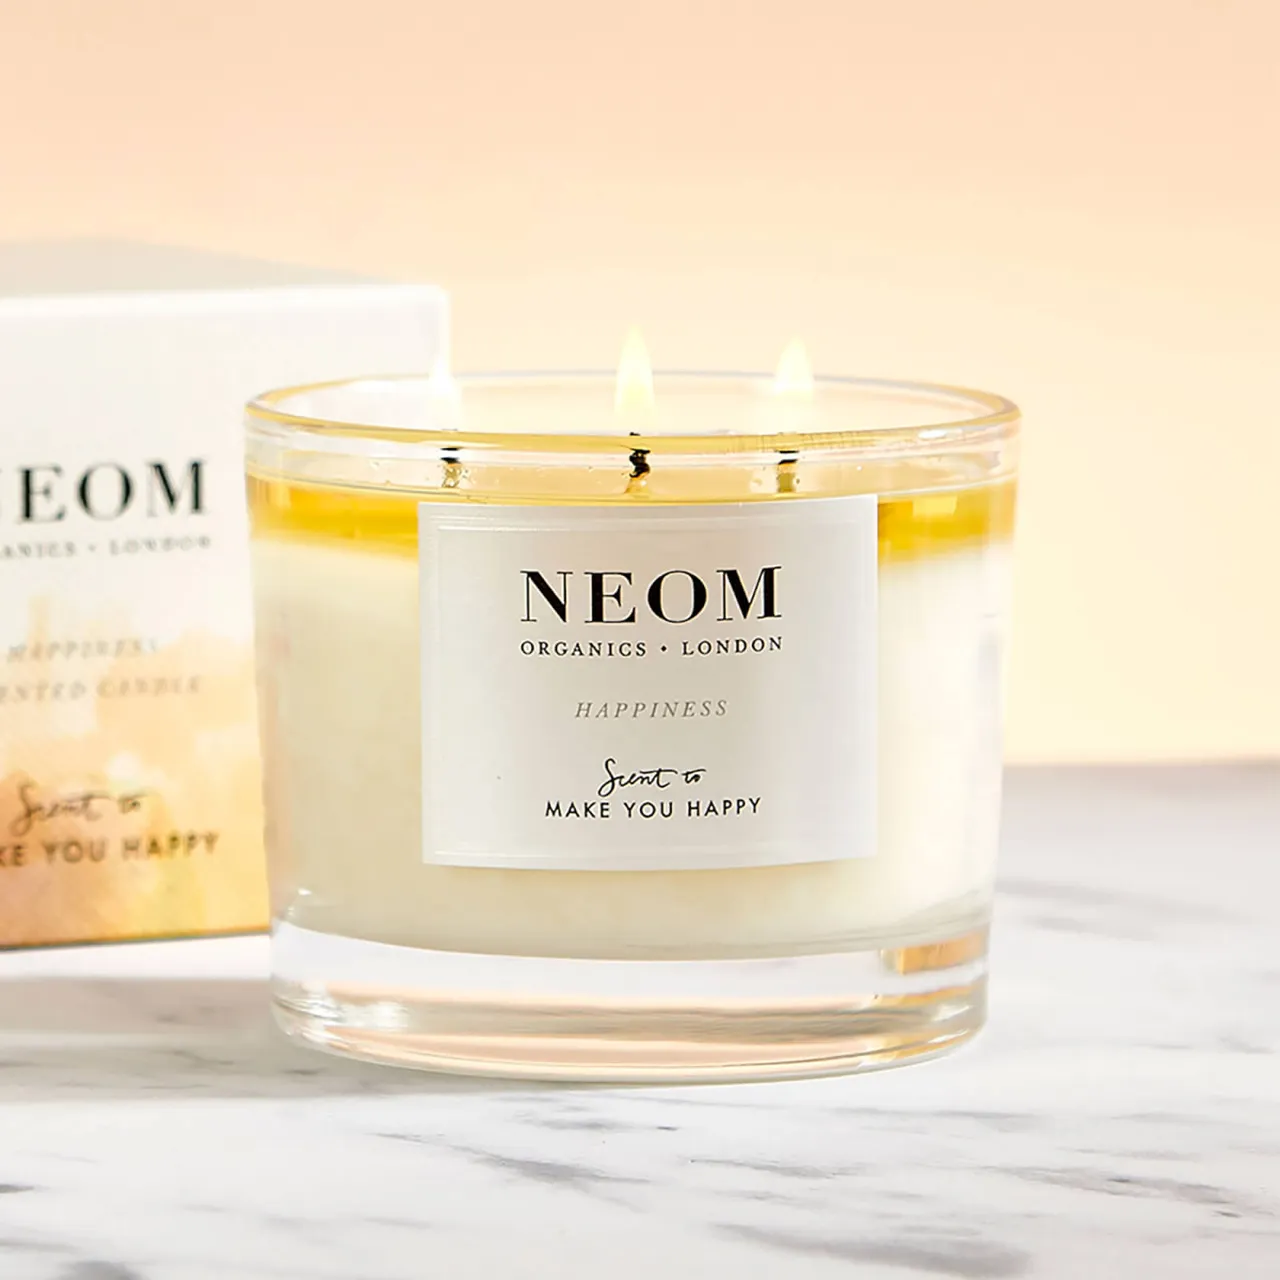 NEOM Happiness Scented 3 Wick Candle